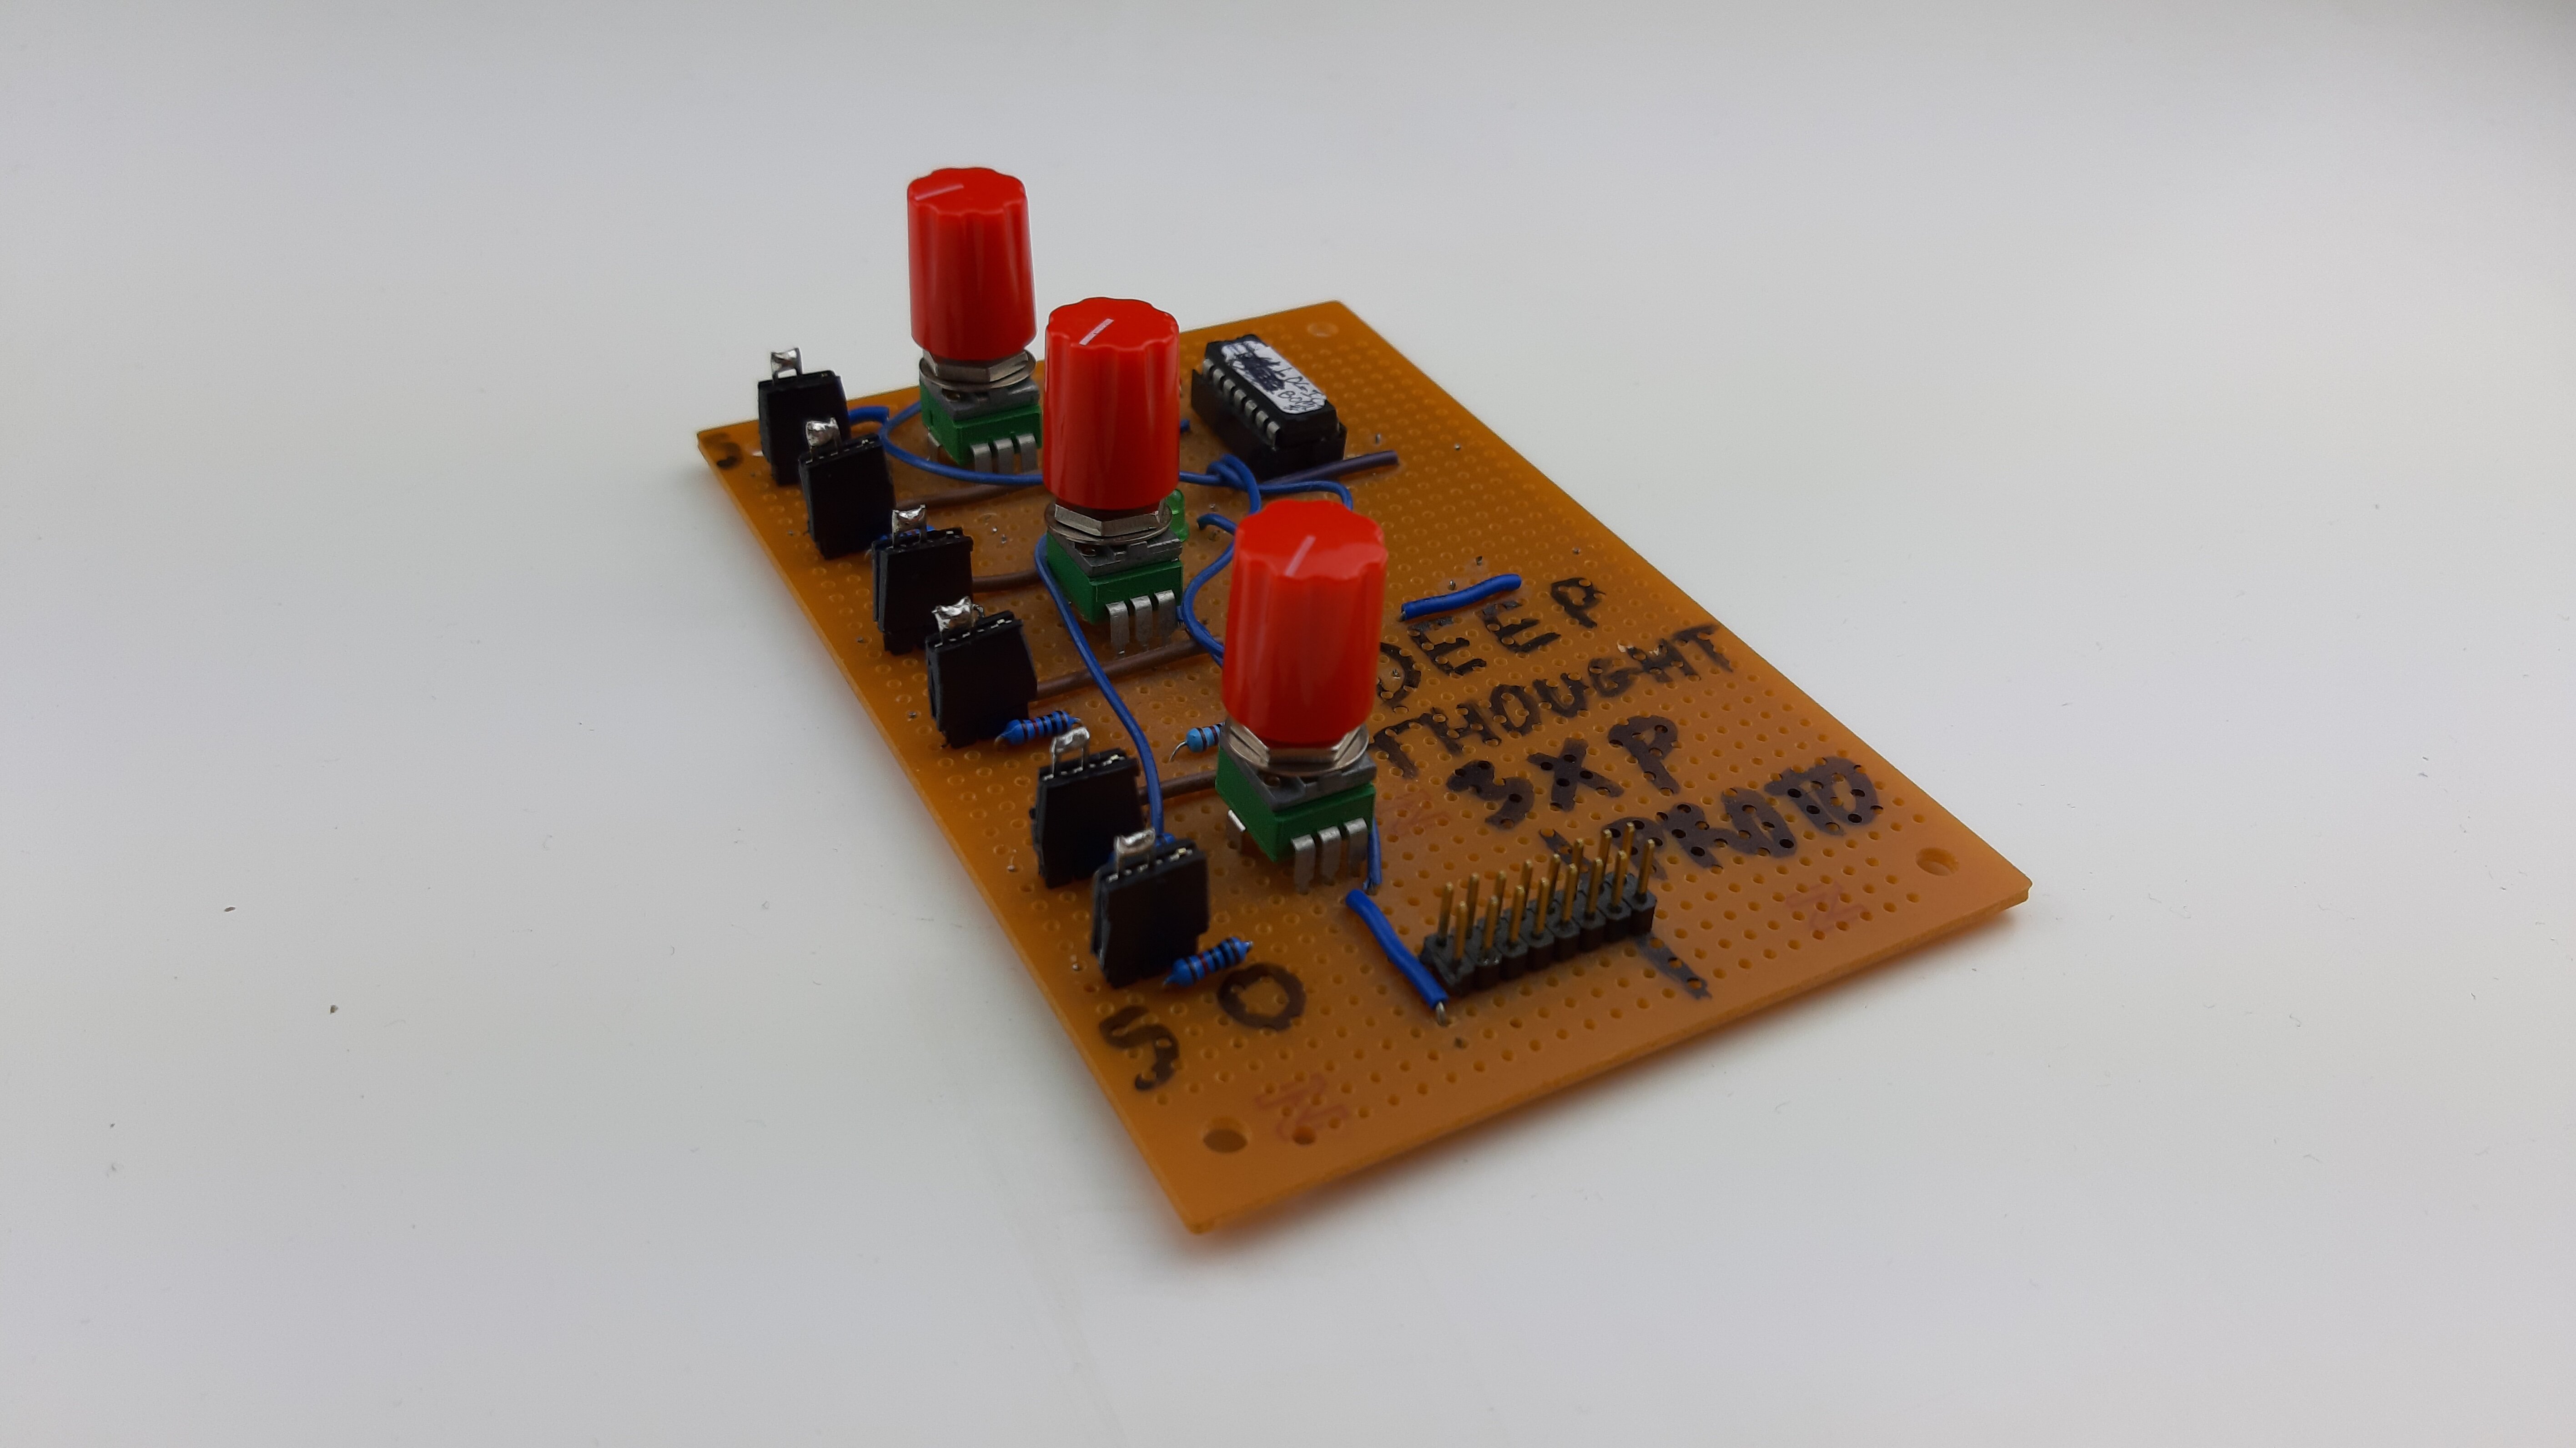 The Deep Thought prototype board used to test Logic Bomb.